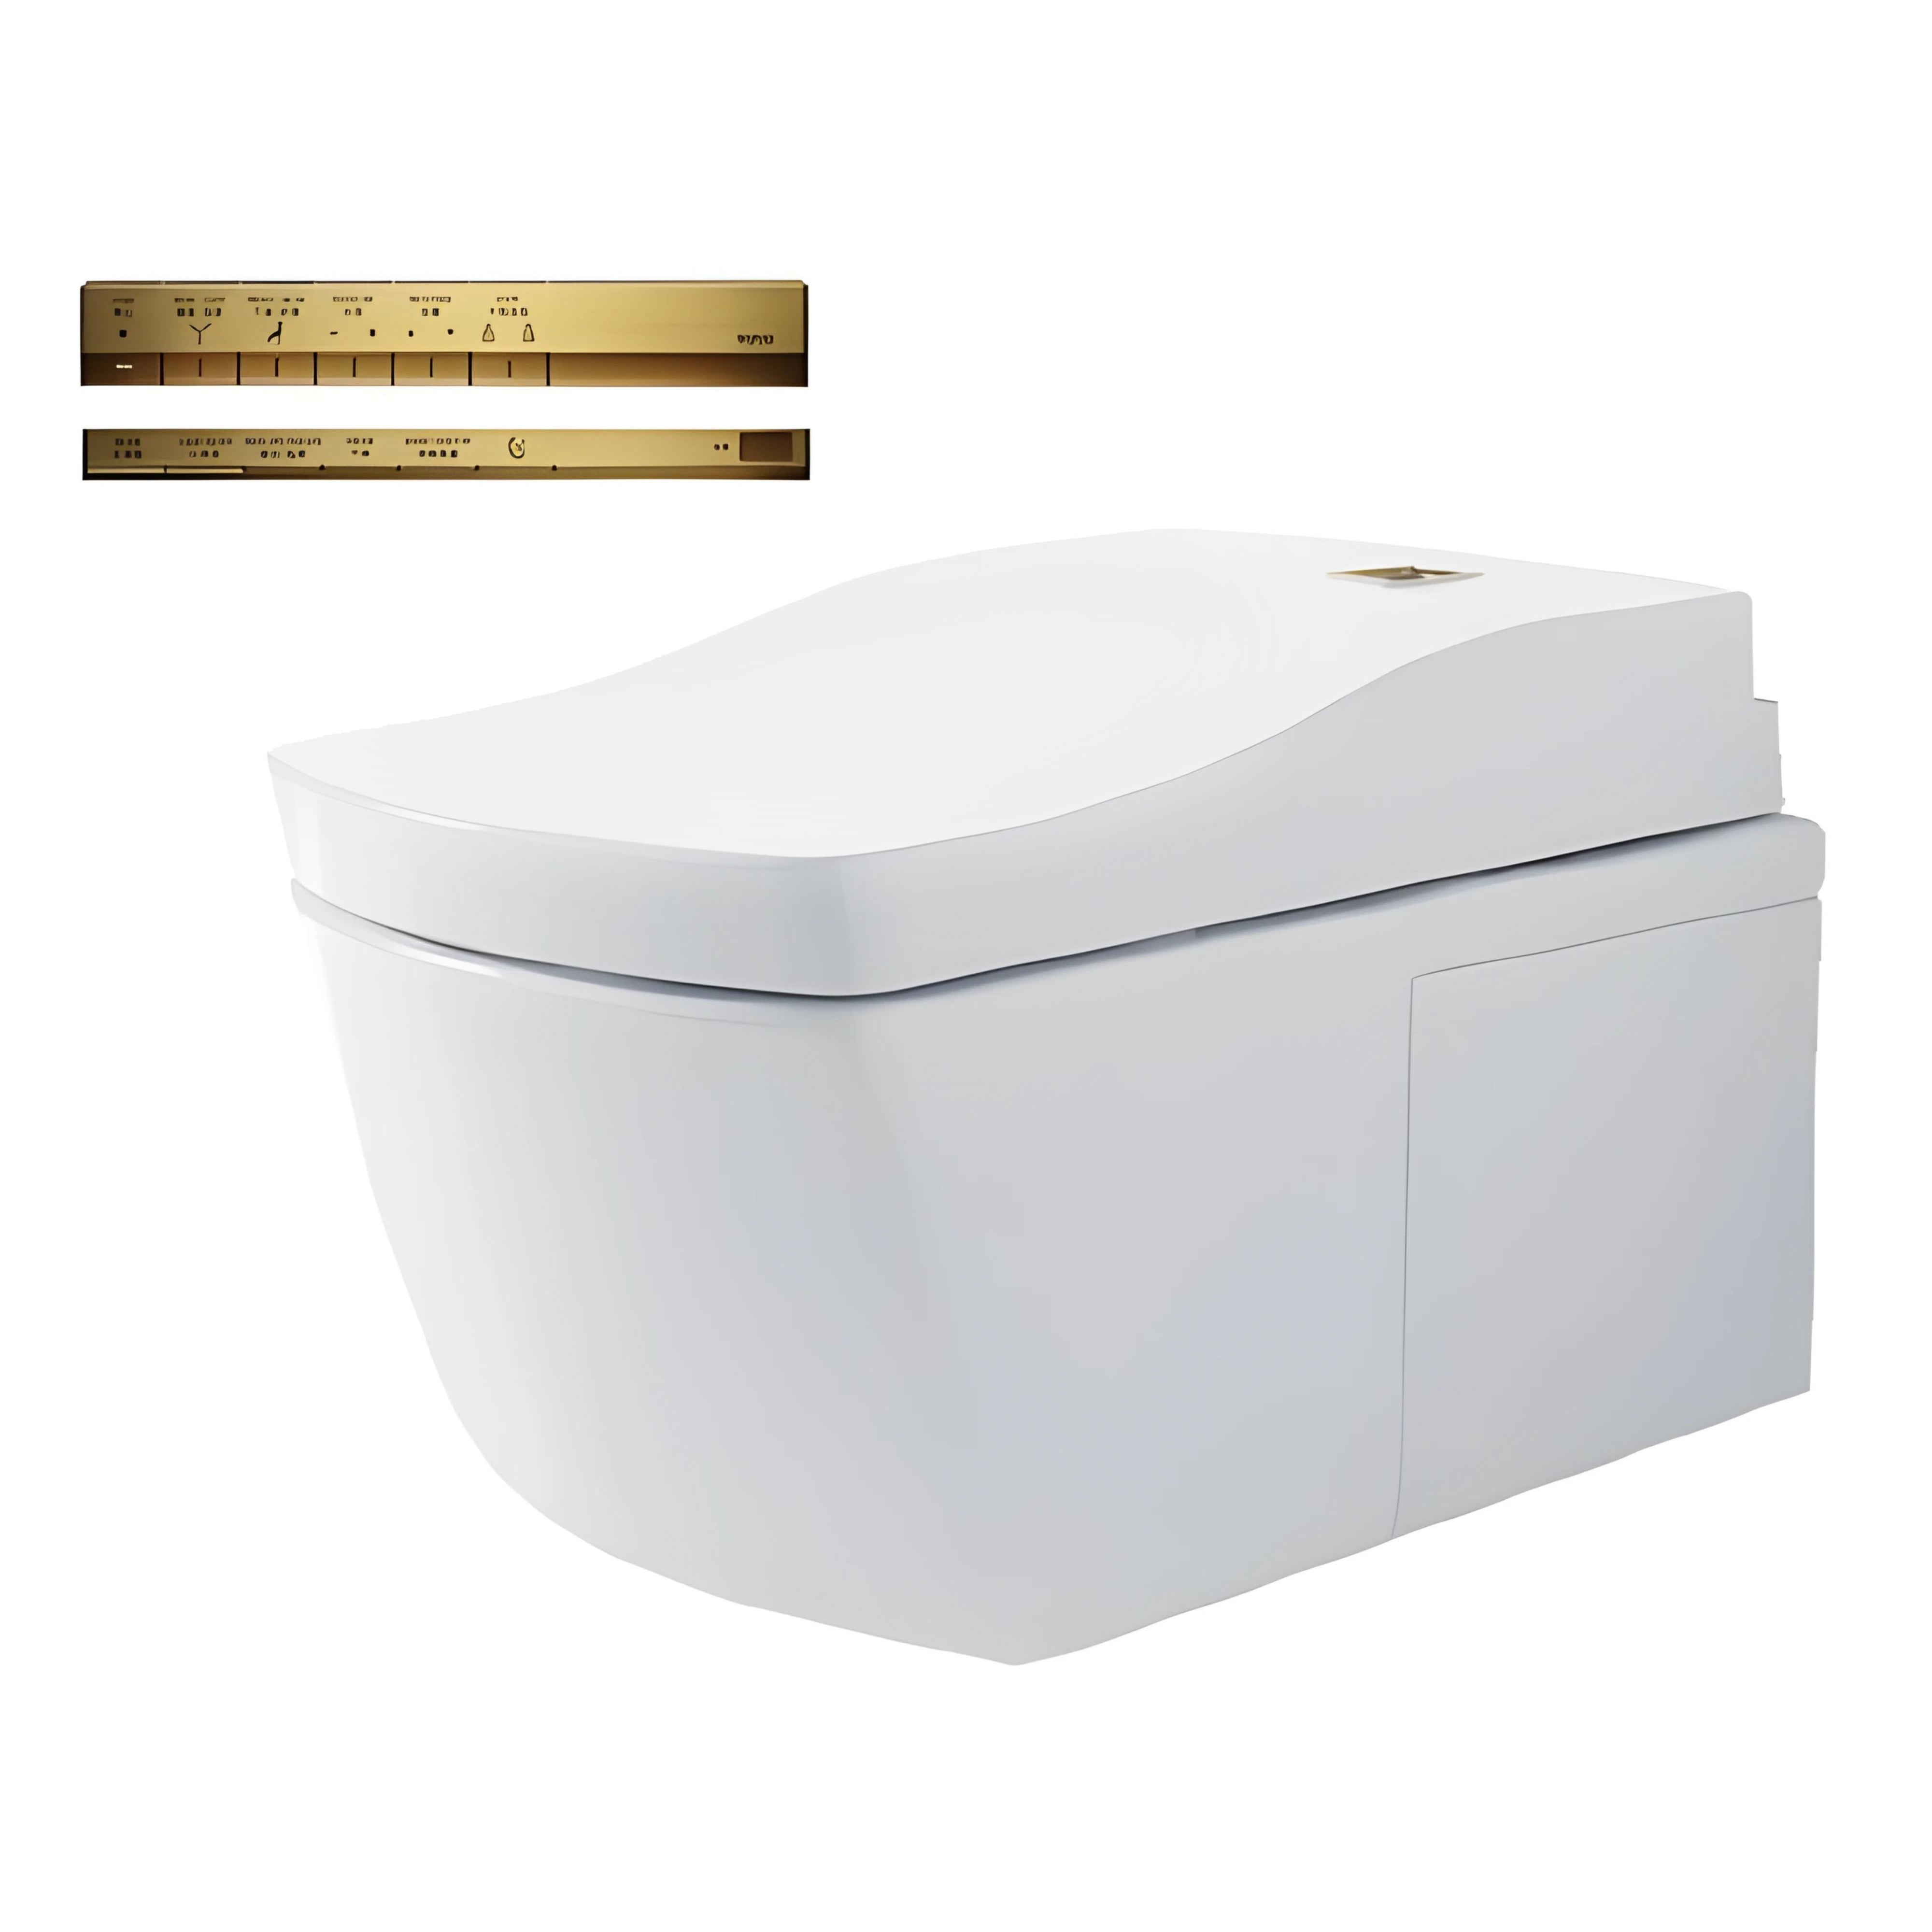 TOTO NEOREST LE II WALL HUNG TOILET AND WASHLET W/ GOLD REMOTE PACKAGE GLOSS WHITE